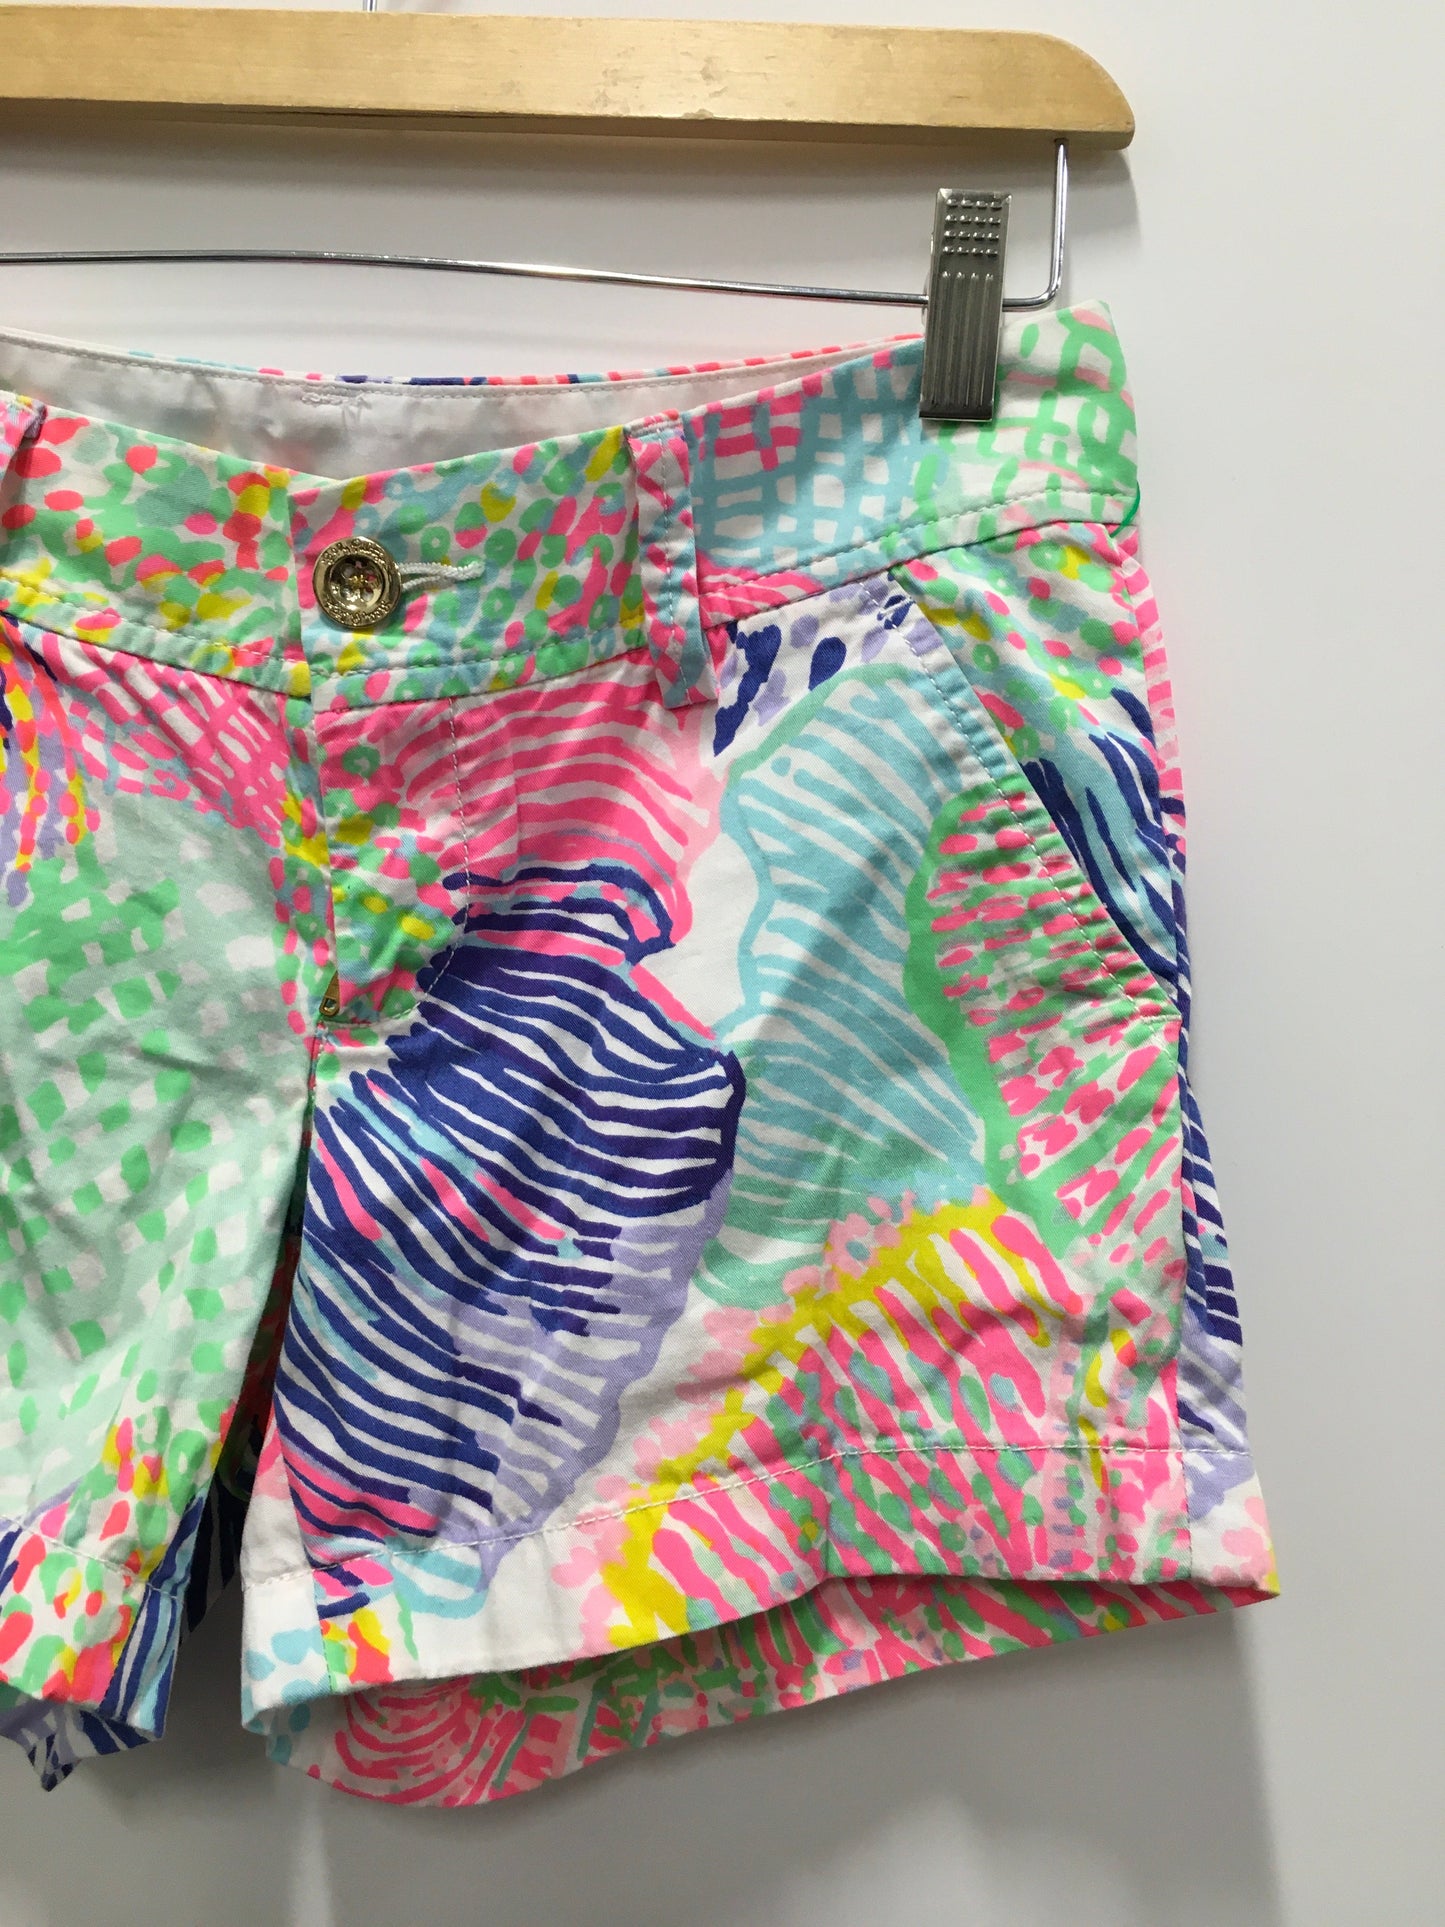 Shorts By Lilly Pulitzer  Size: 0r